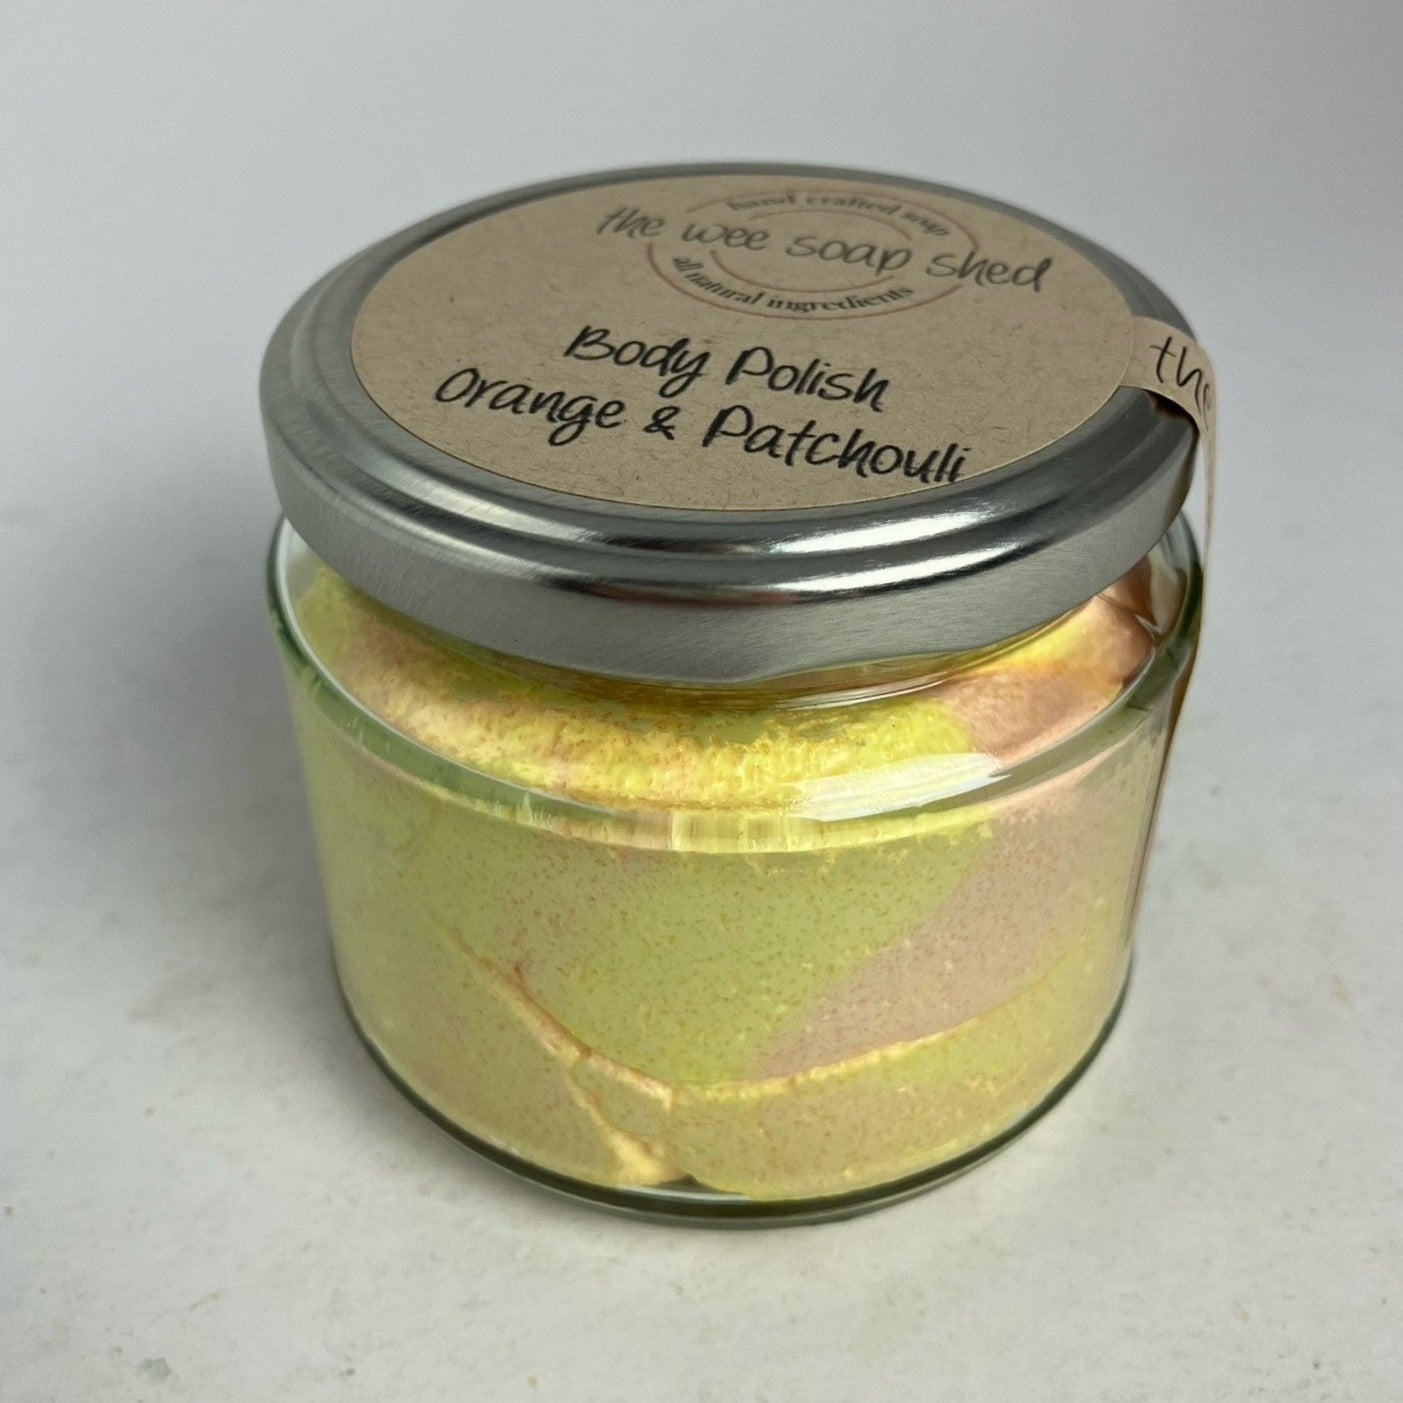 The Wee Soap Shed Orange & Patchouli Body Polish